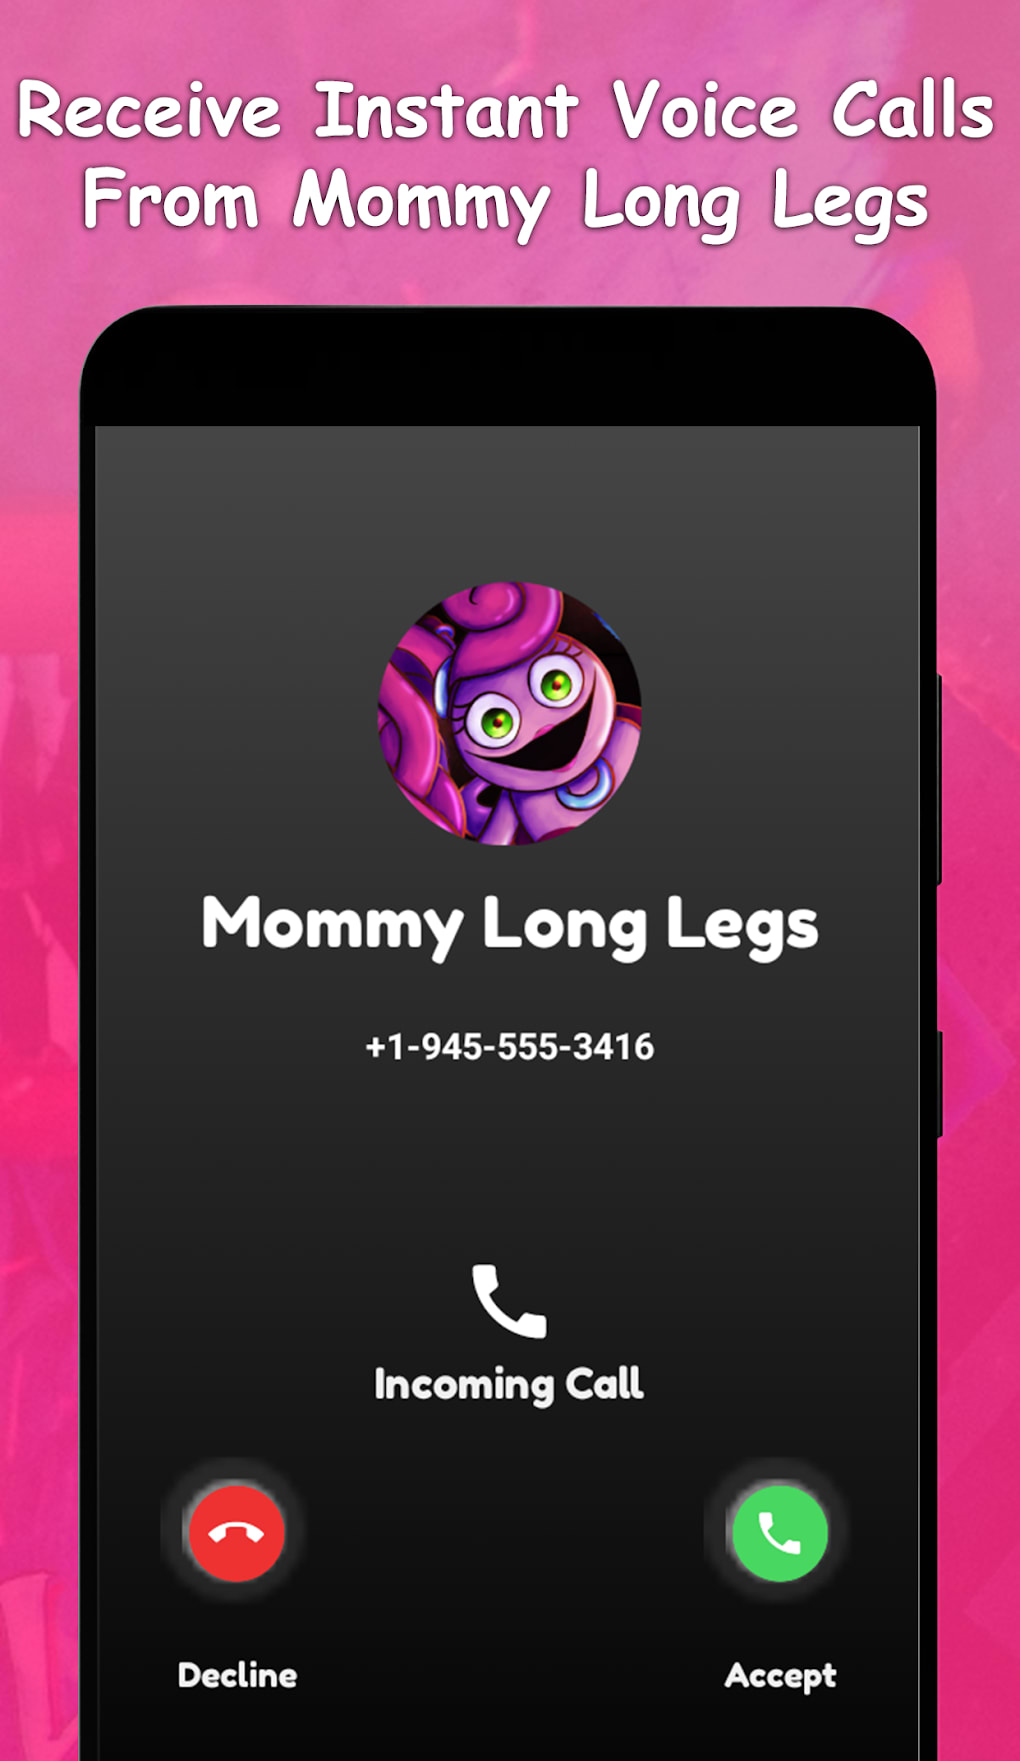 About: Mommy Long Legs Vs FNF Music (Google Play version)